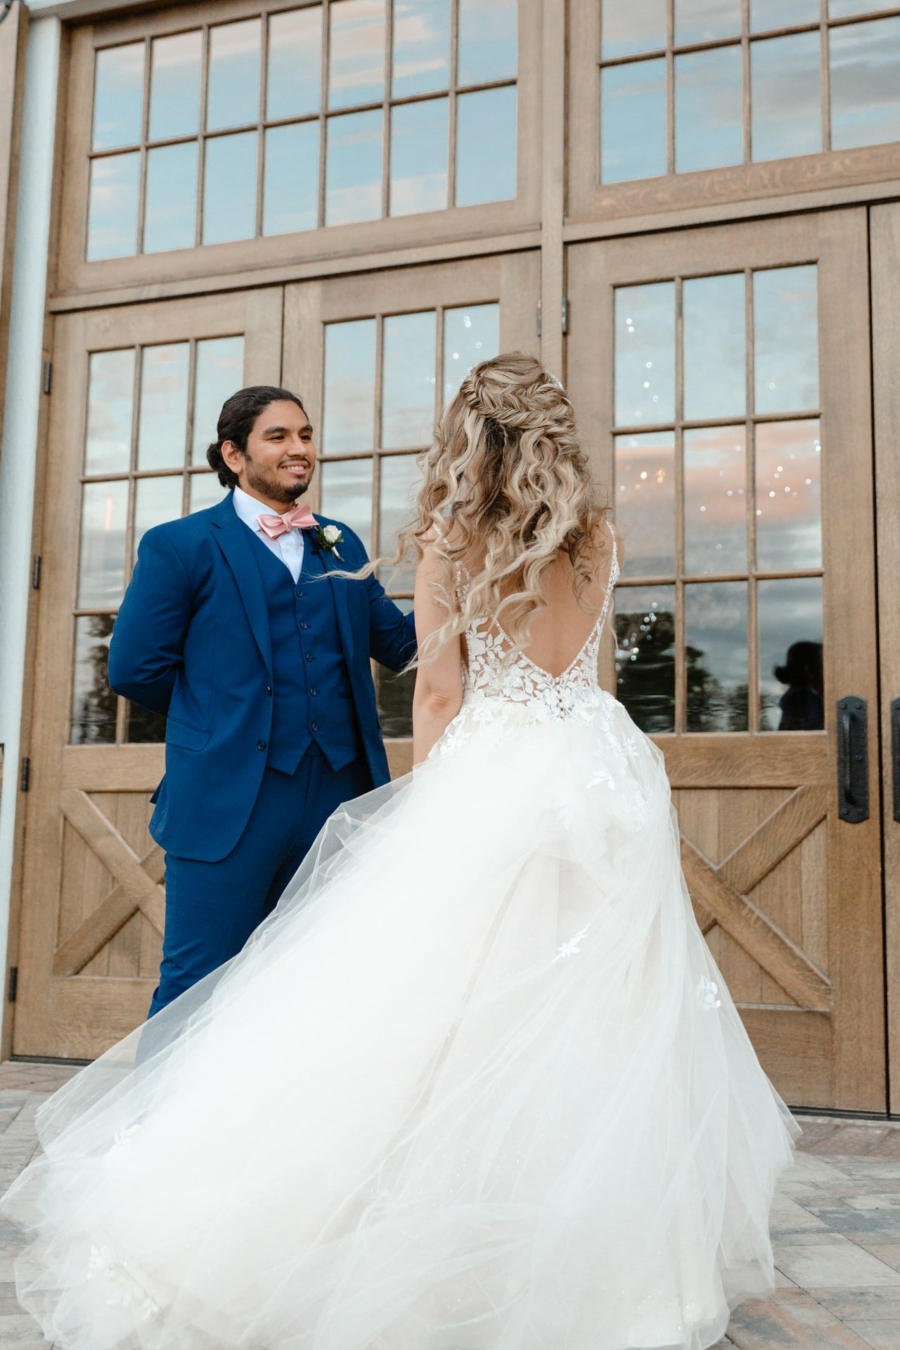 Romantic wedding in middletown ny 5